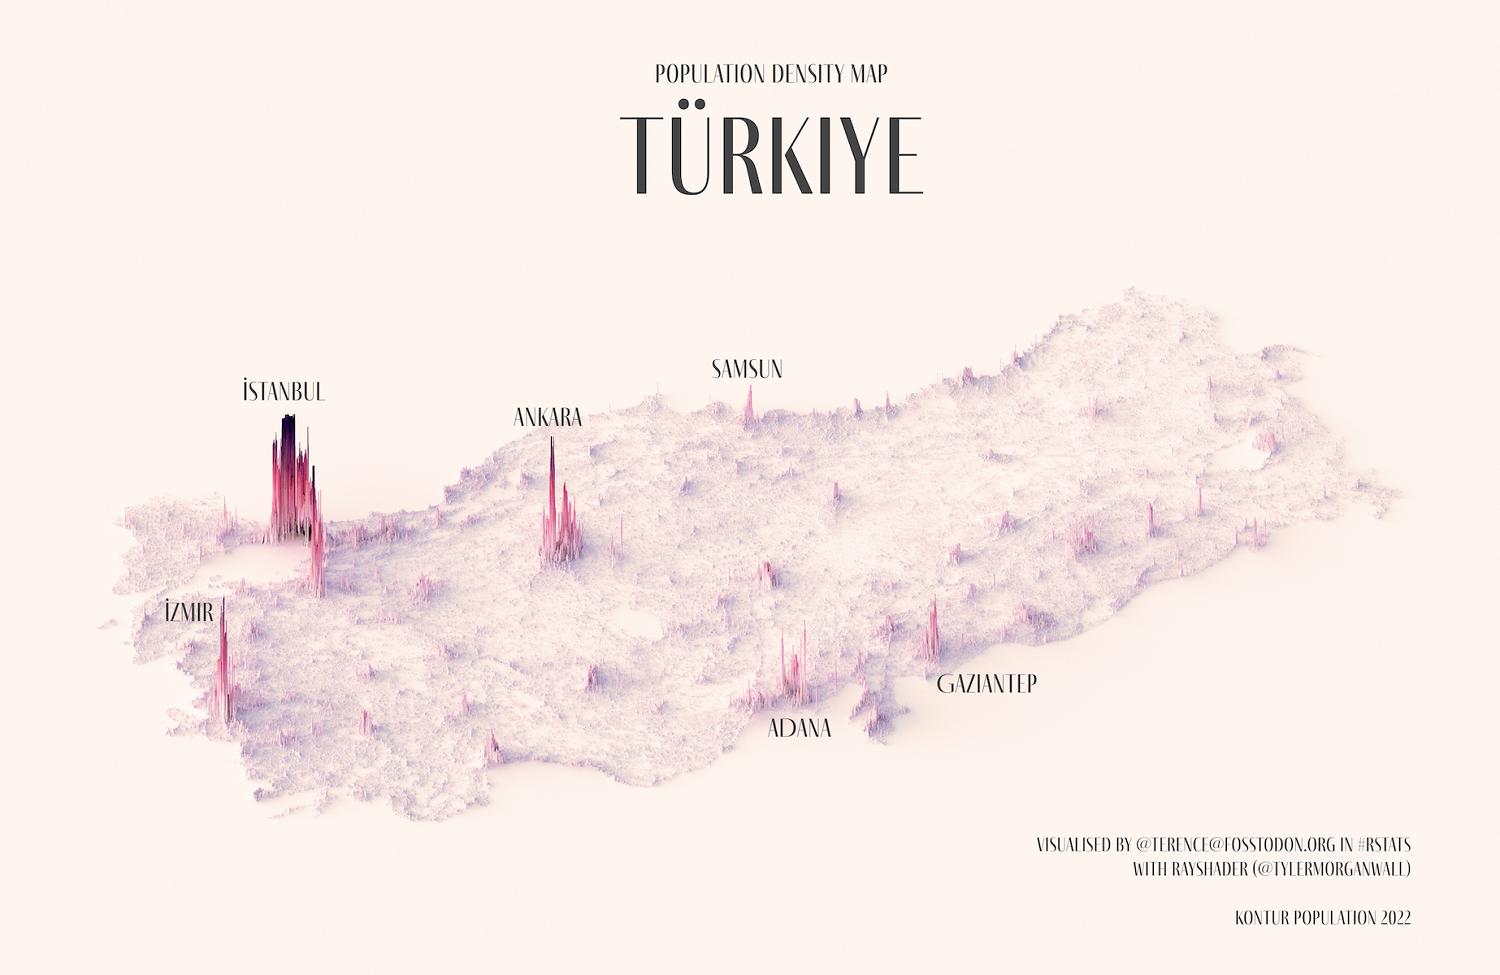 This image shows a map of Türkiye and its population spread.